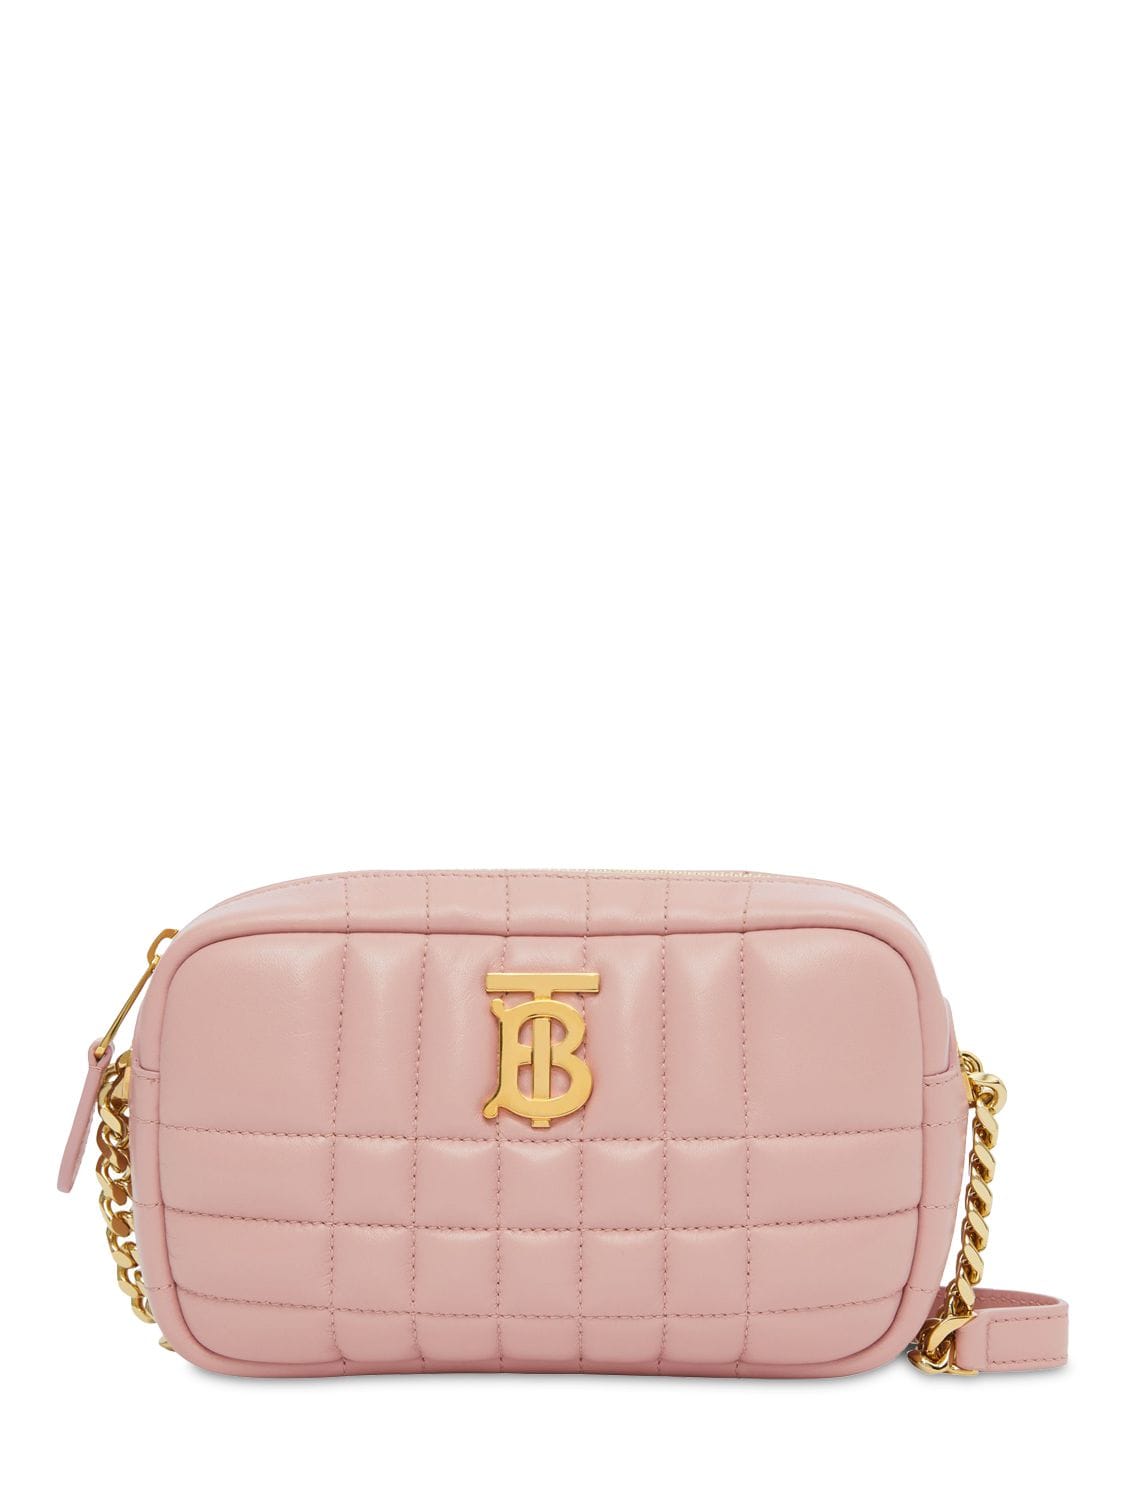 BURBERRY: Lola bag in quilted leather - Pink  Burberry mini bag 8066180  online at